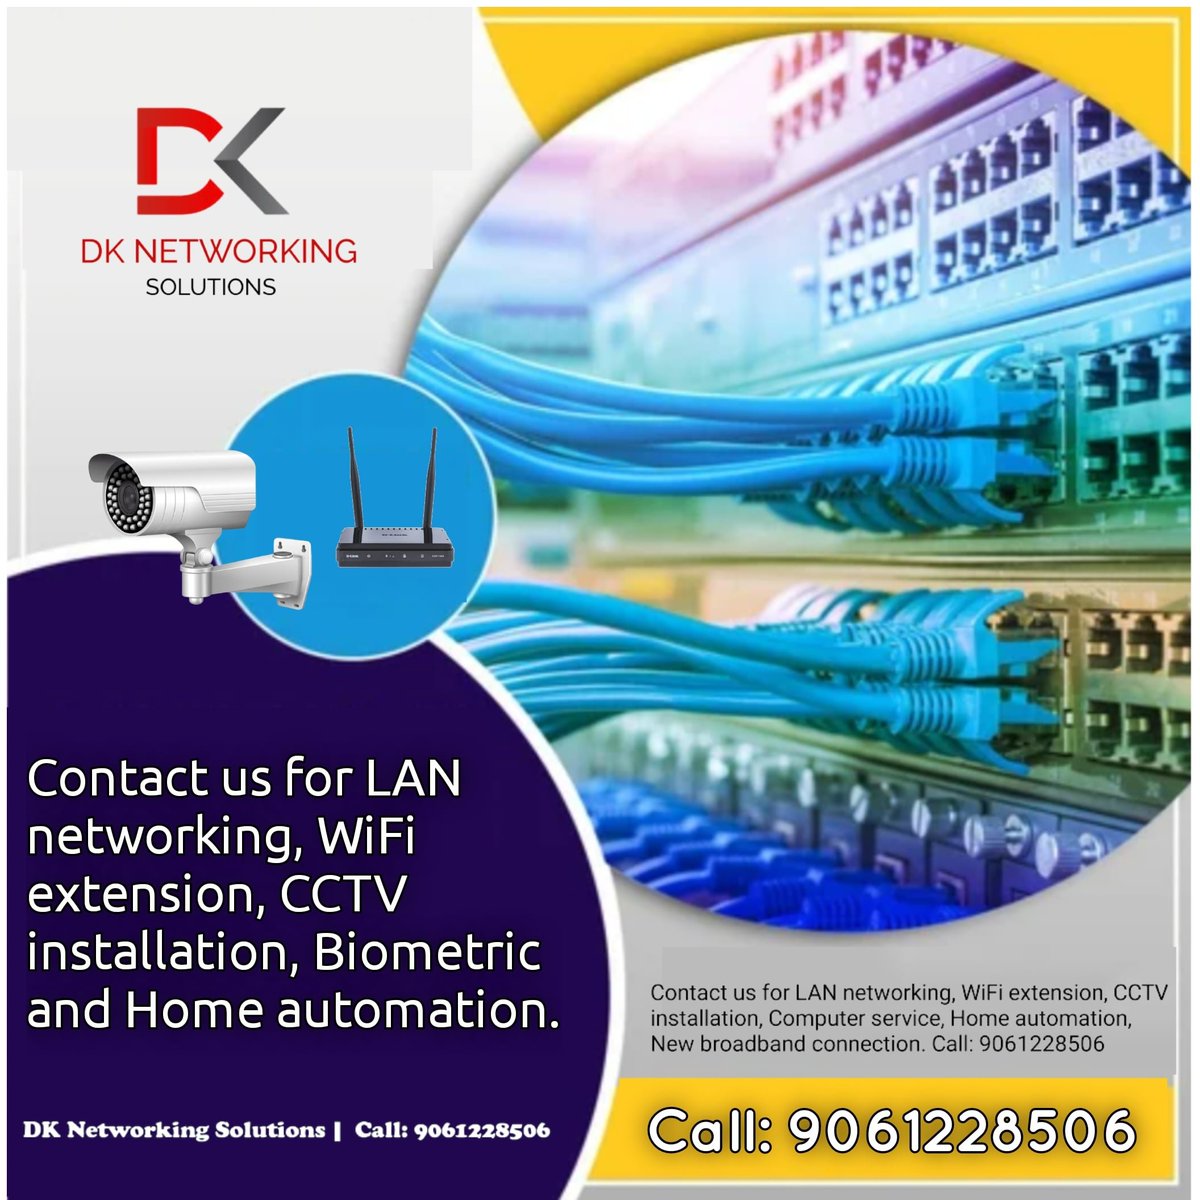 Contact us for:  CCTV installation and LAN networking, WiFi extension, Biometric and Home automation. Ph: 9061228506 mail: dknetworkingsolutions@gmail.com website: networkingsolutions.com

#DKnetworkingsolutions #dineeshkumarcd